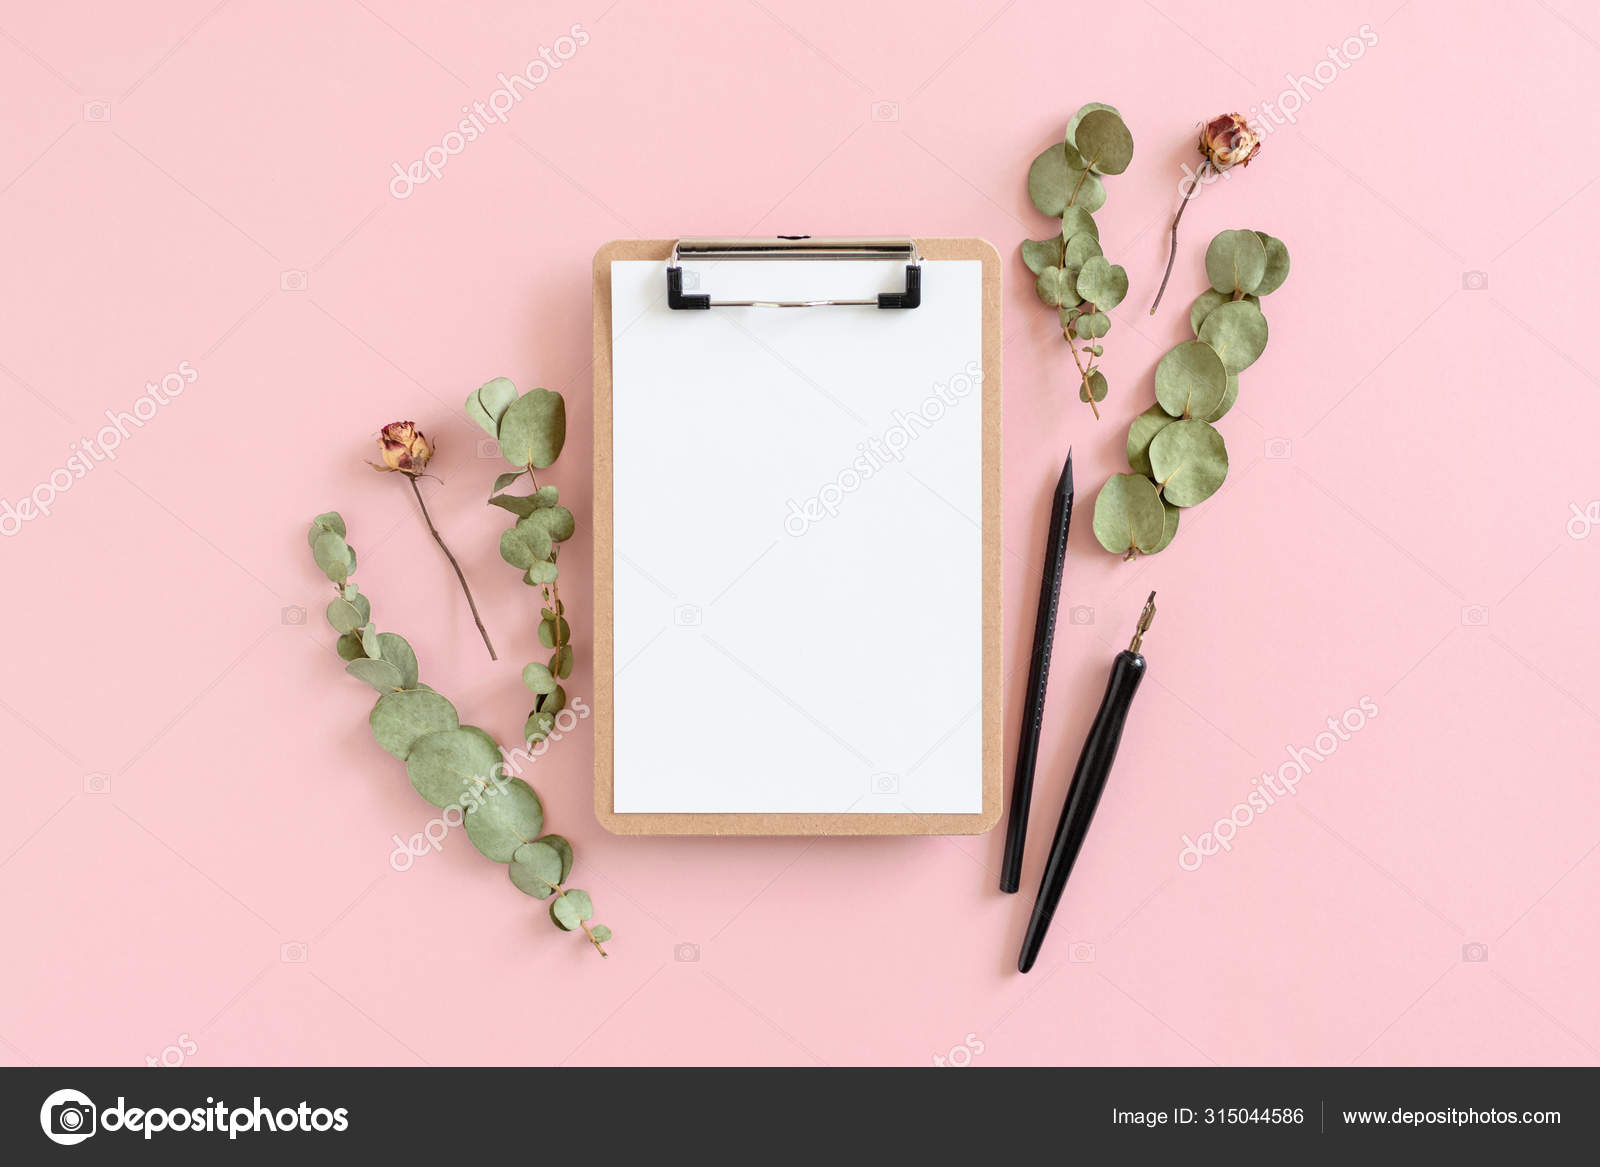 Download Clipboard Mockup Dried Flowers Calligraphy Pen Stock Photo Image By C Rorygezfresh 315044586